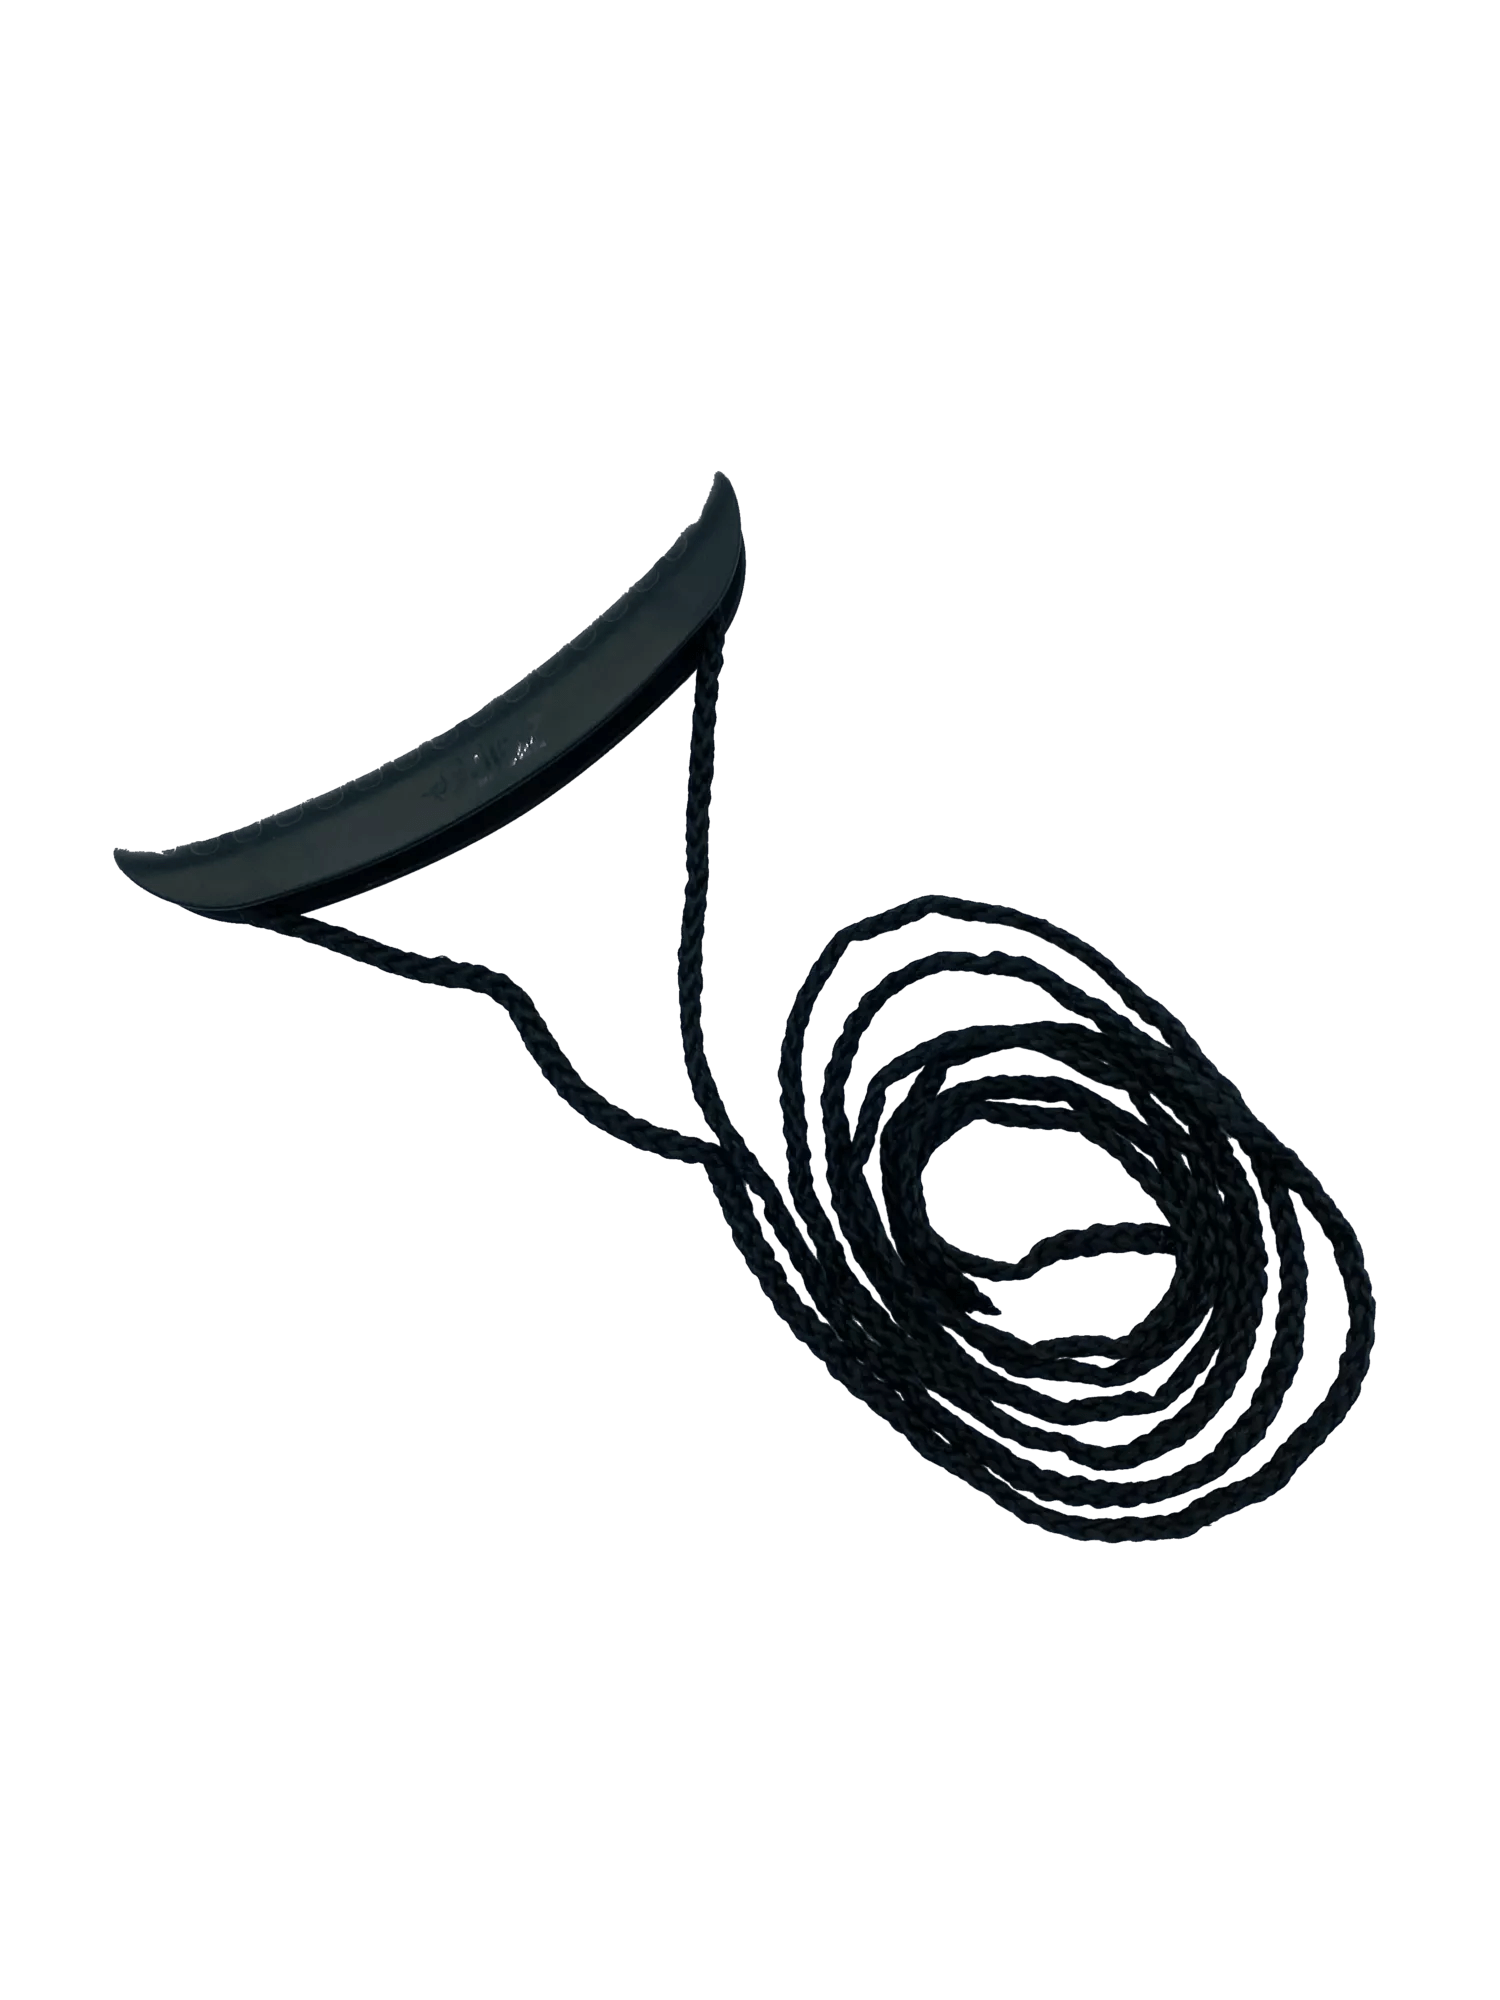 PELICAN - Black Polyester Rope with Handle 110 in. / 2.8m -  - PS2178-00 - TOP